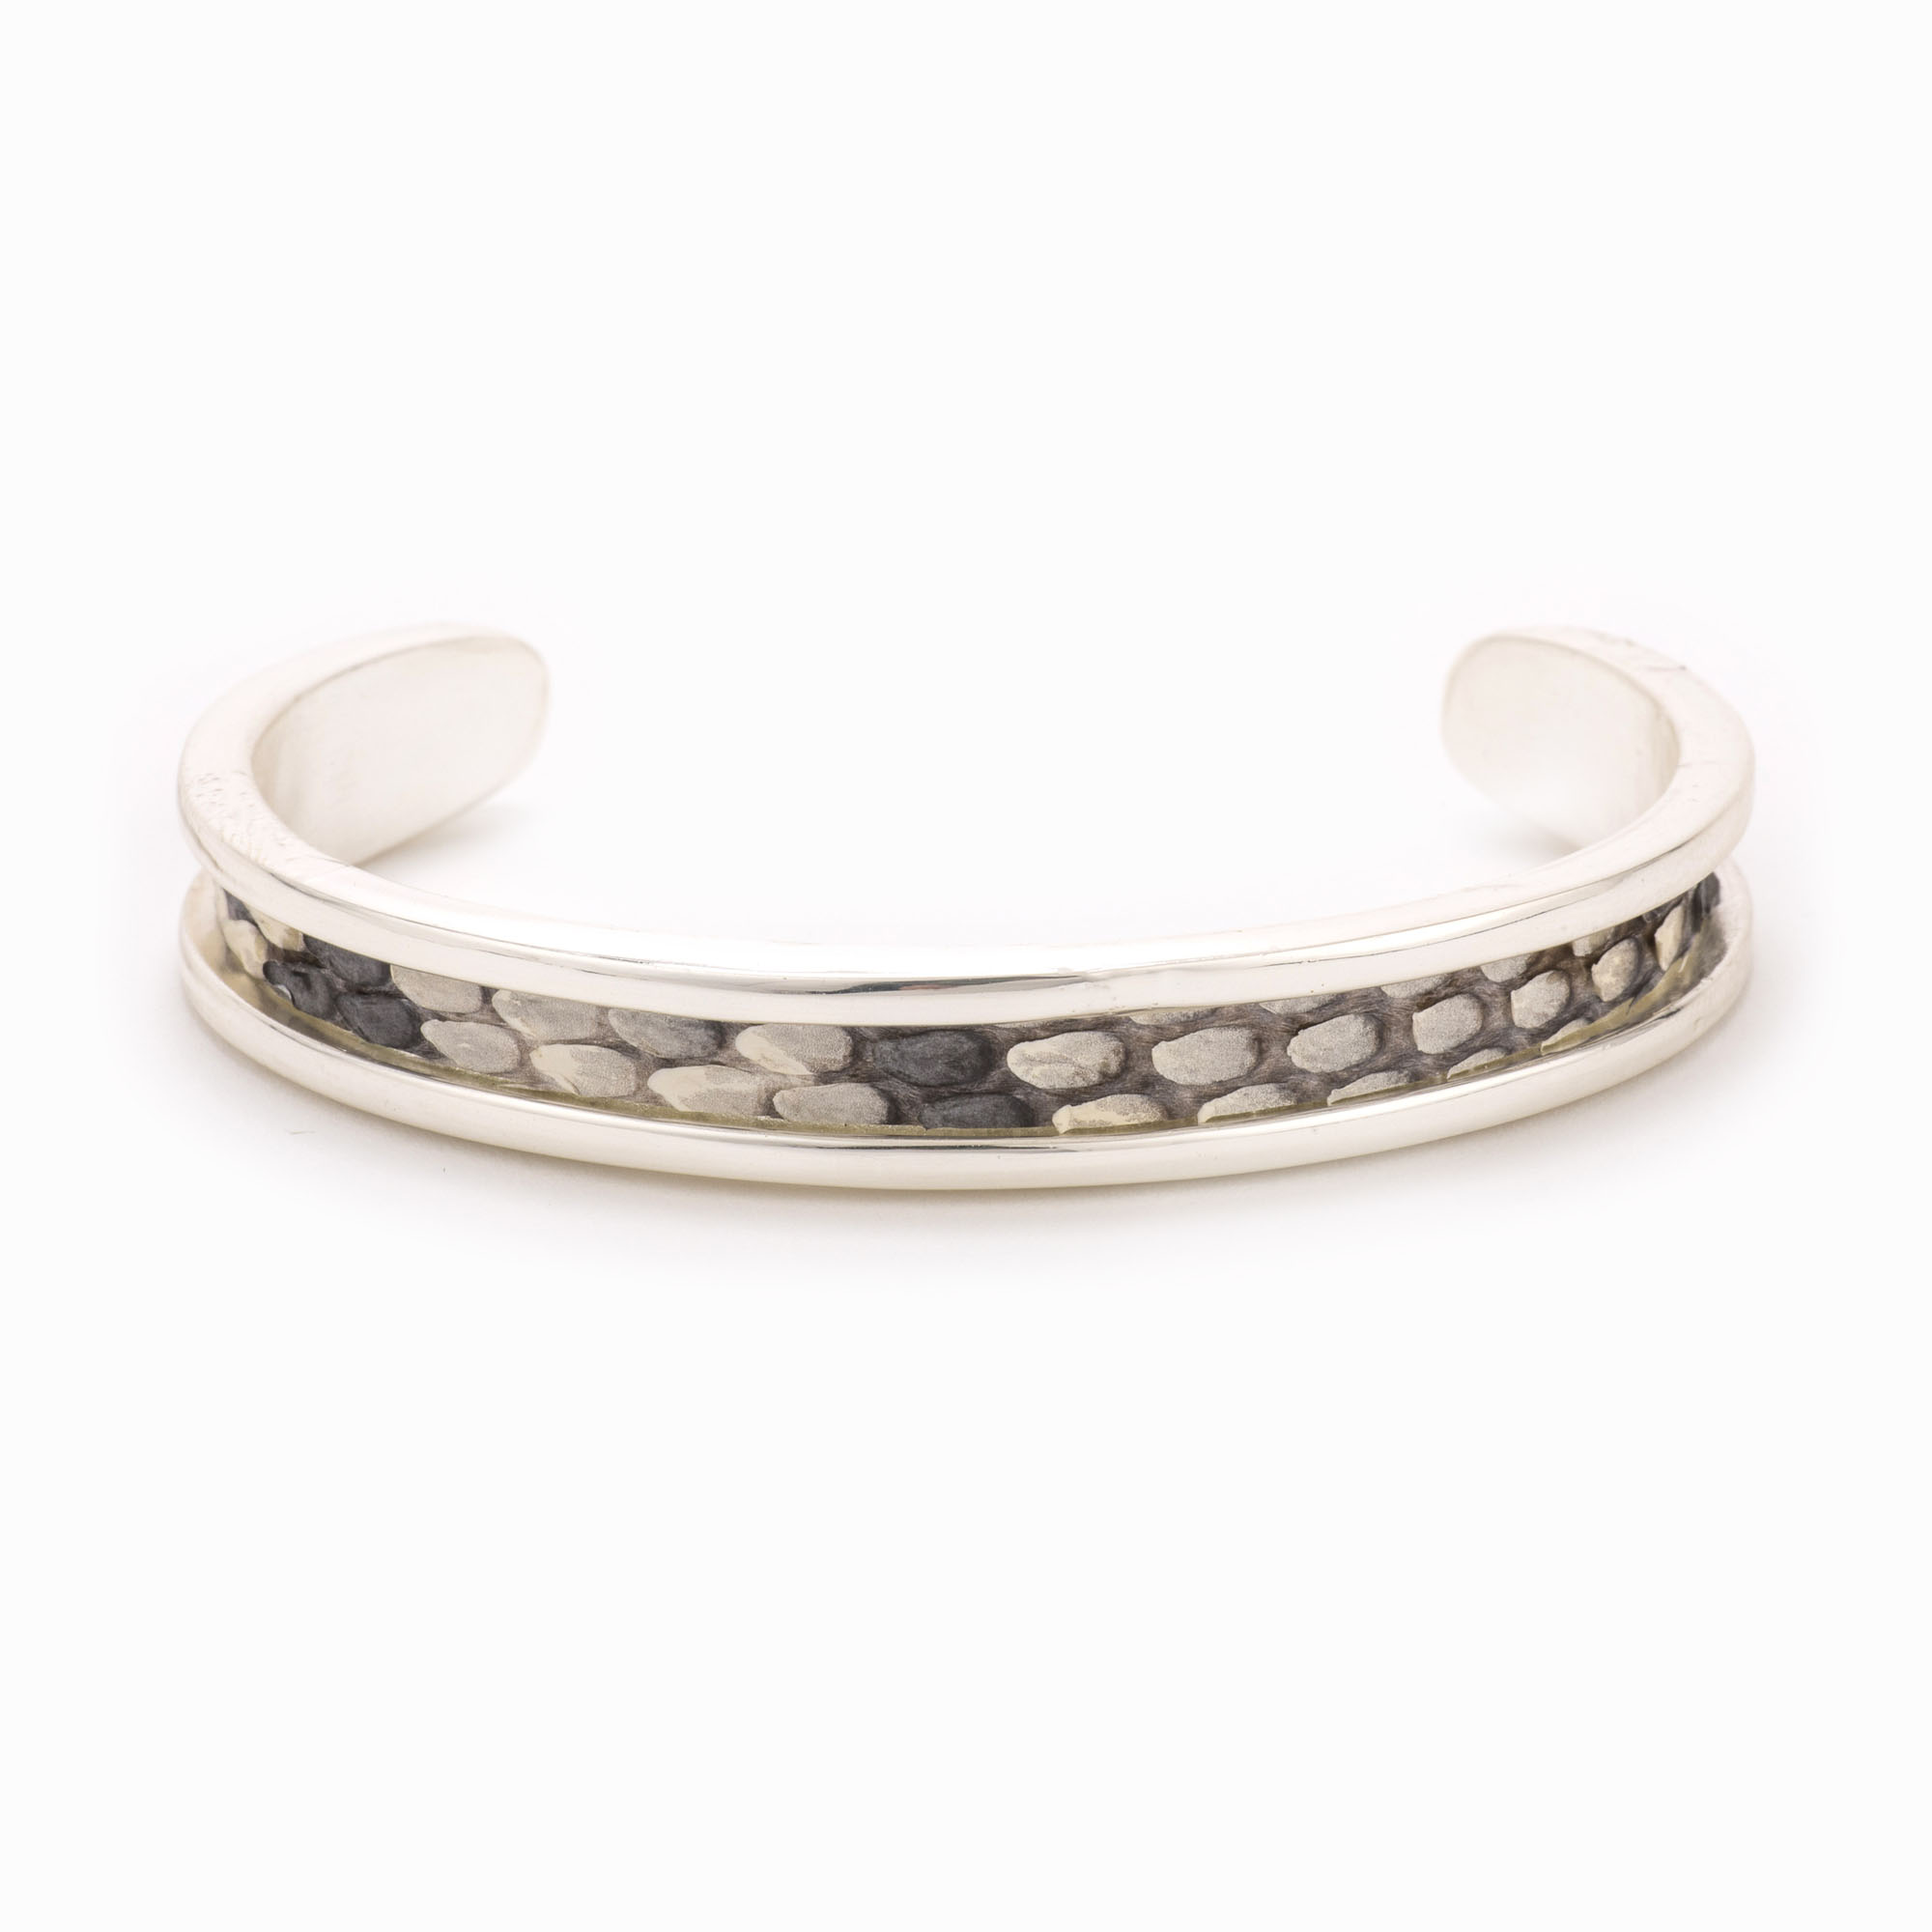 A small silver cuff with white and black colored snakeskin pattern inlaid.